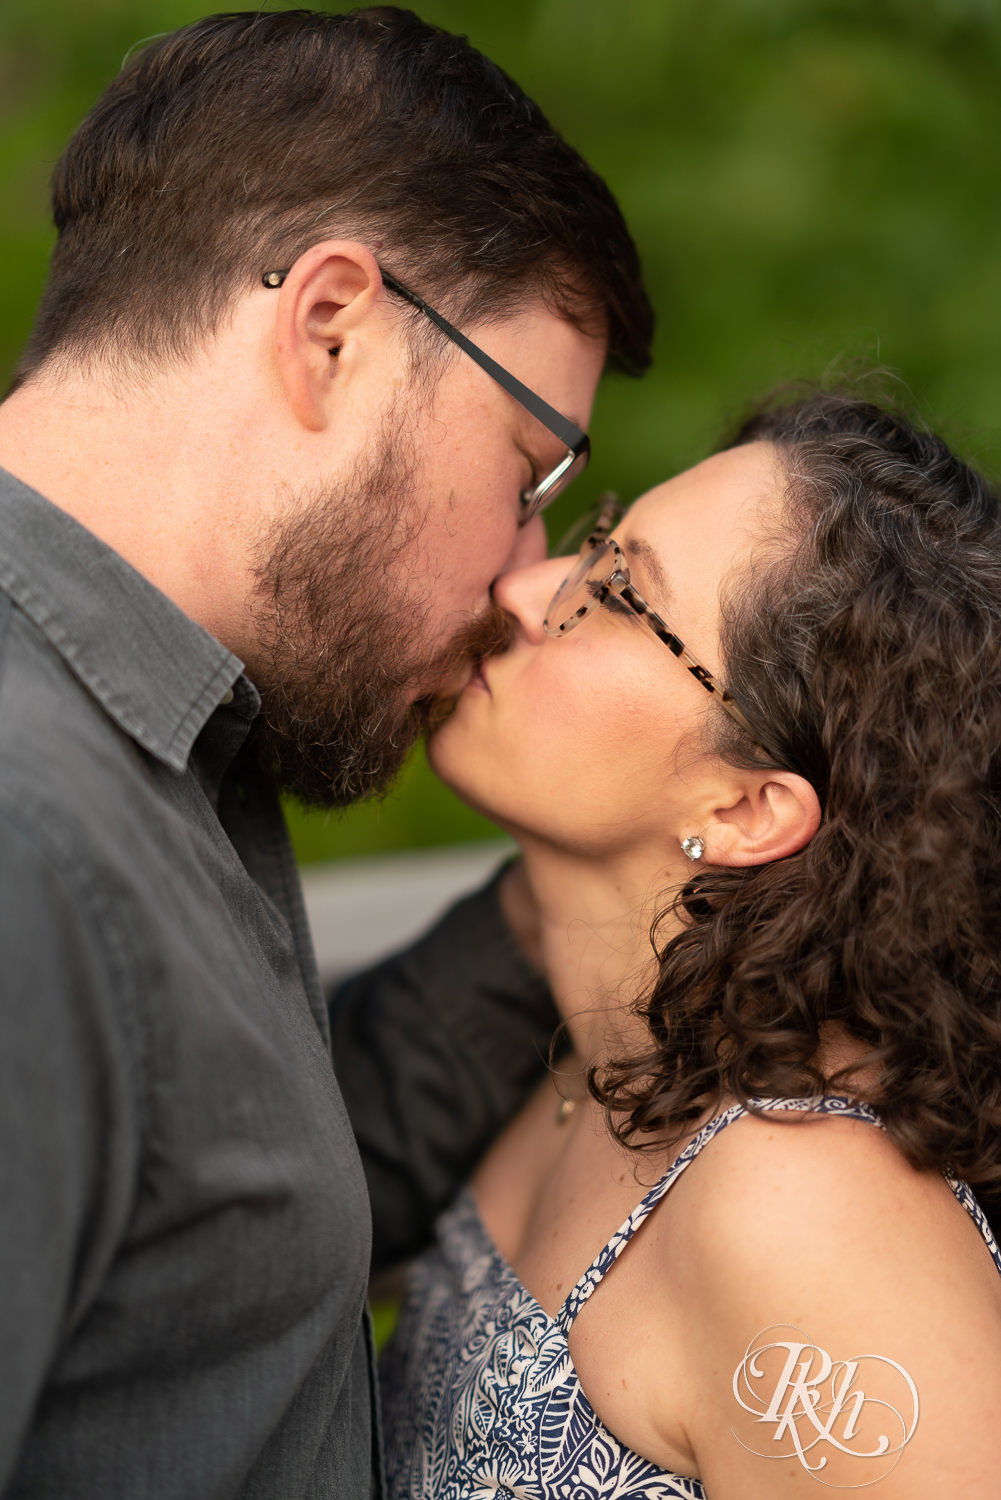 Man and woman kissing at sunset engagement session in Eagan, Minnesota.